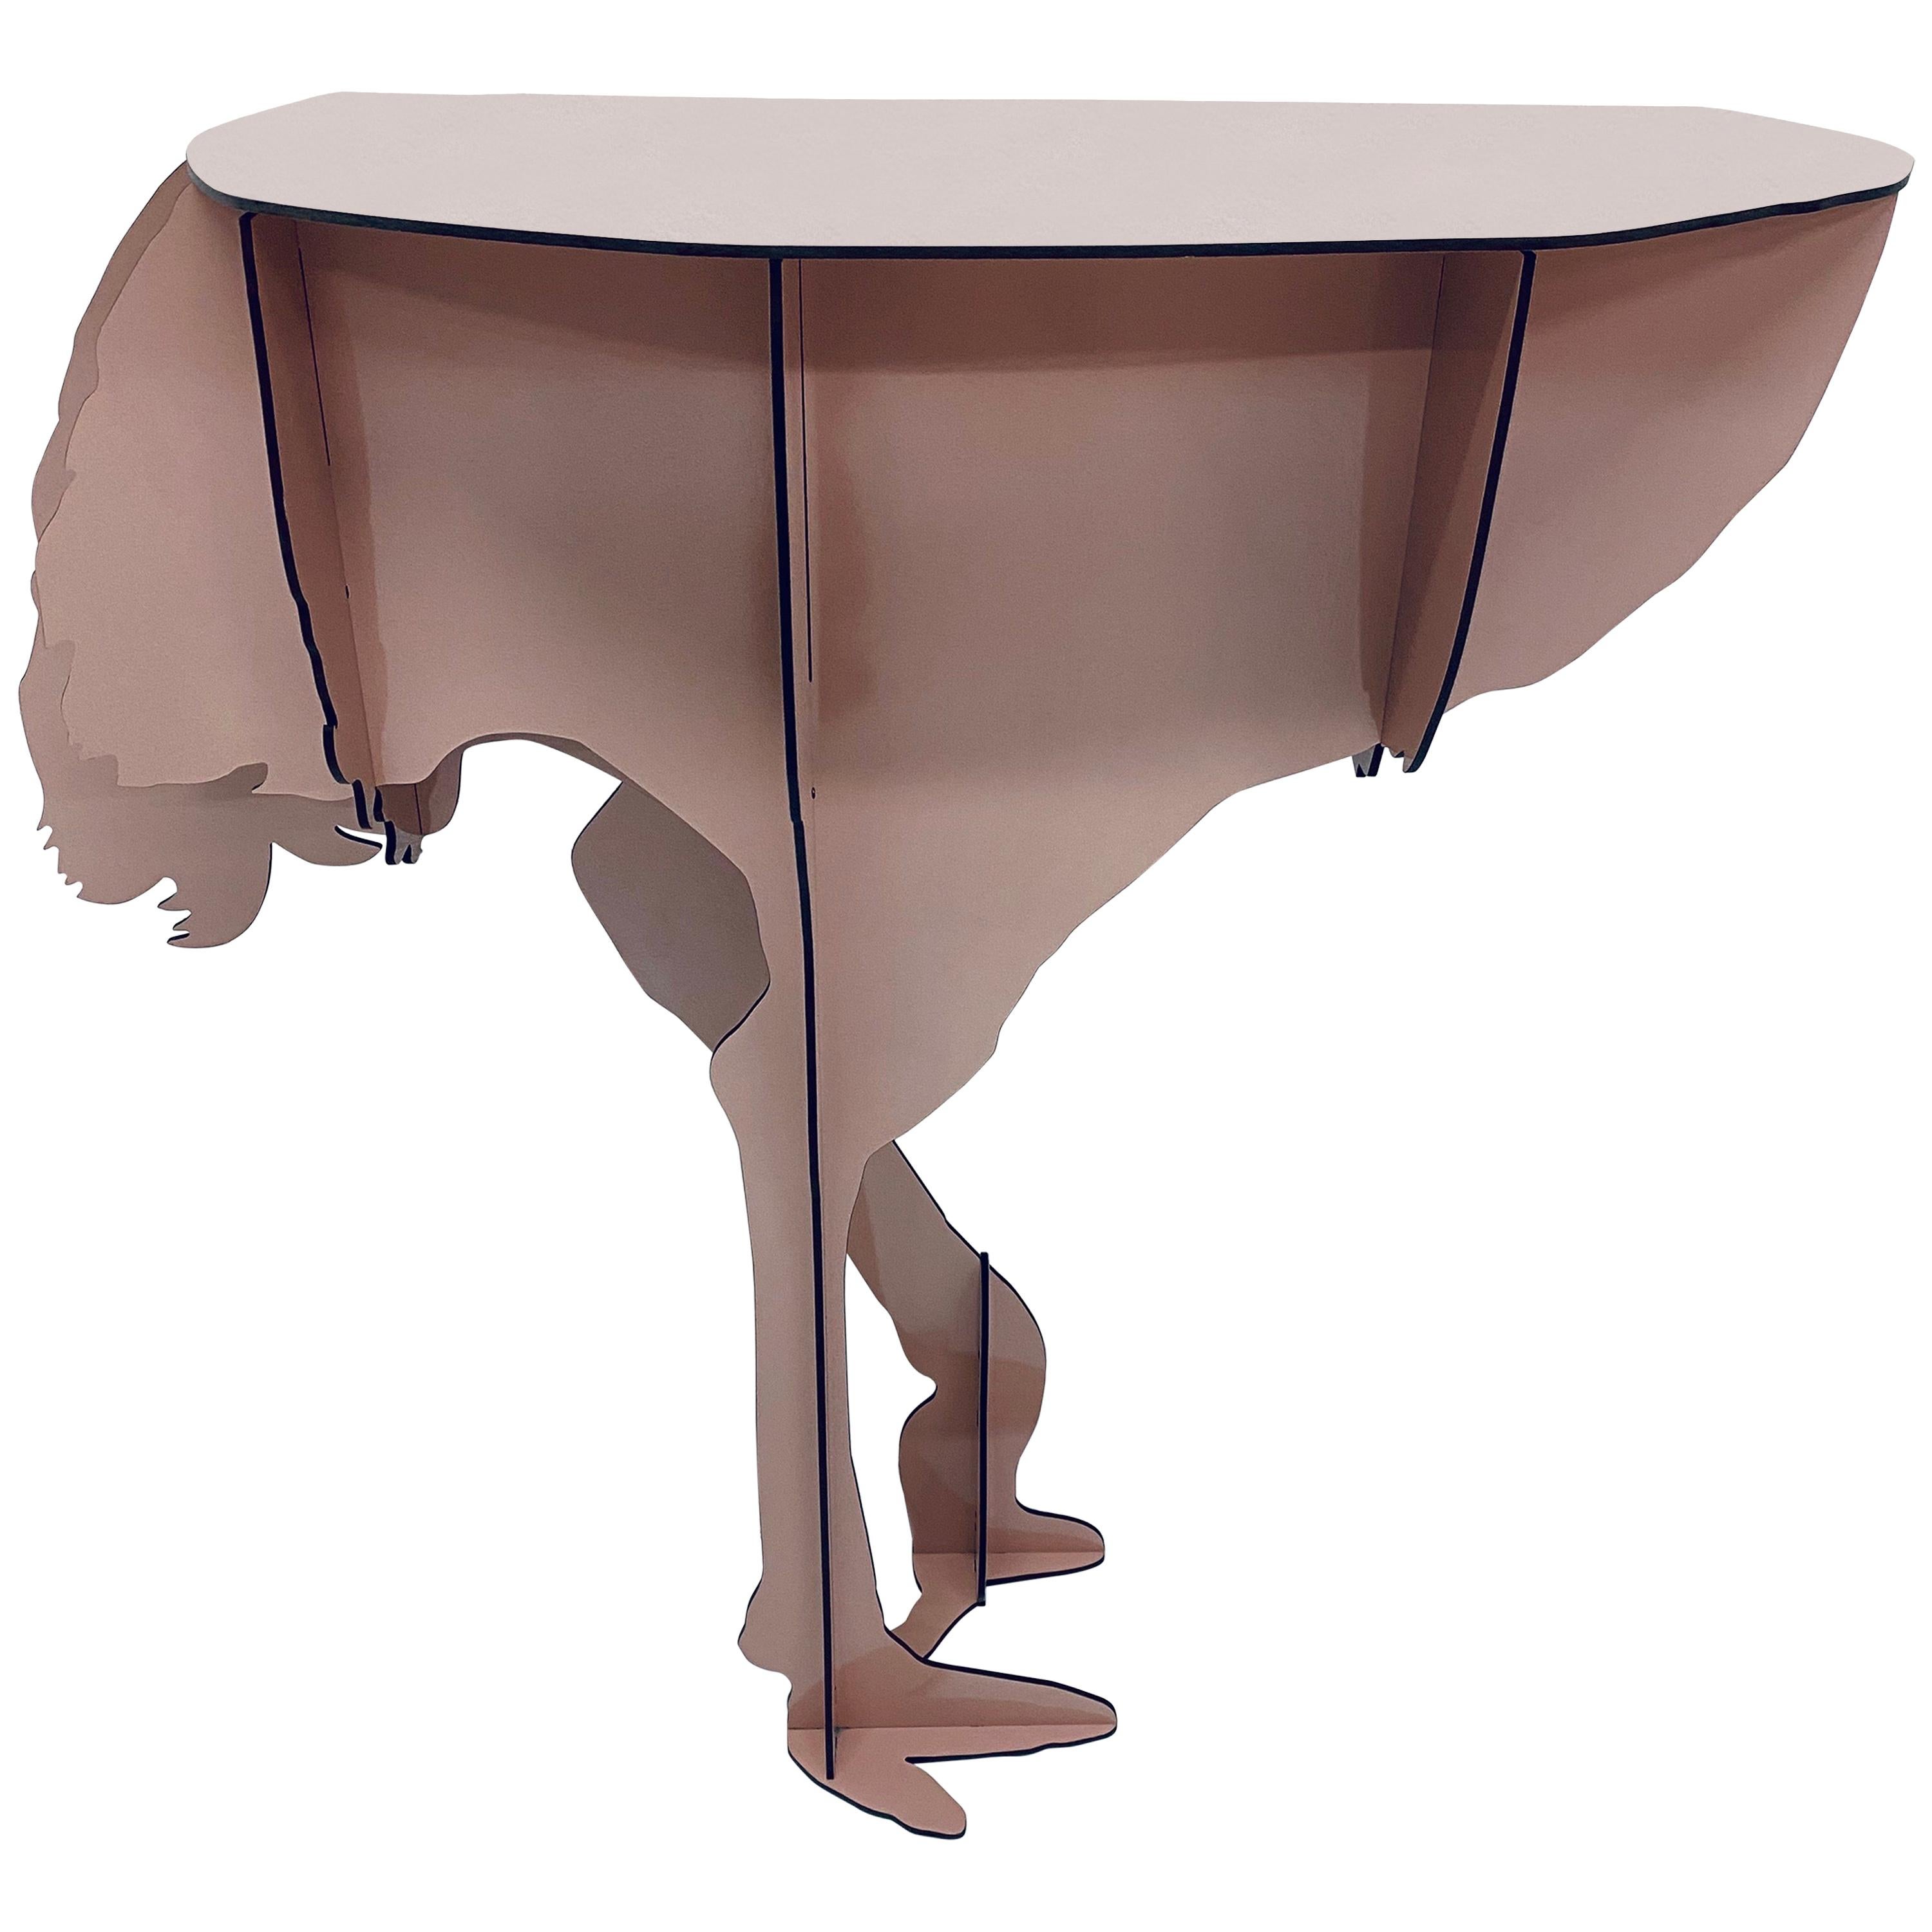 Limited Edition iBride "Diva" Ostrich Console Table by Rachel and Benoît Convers